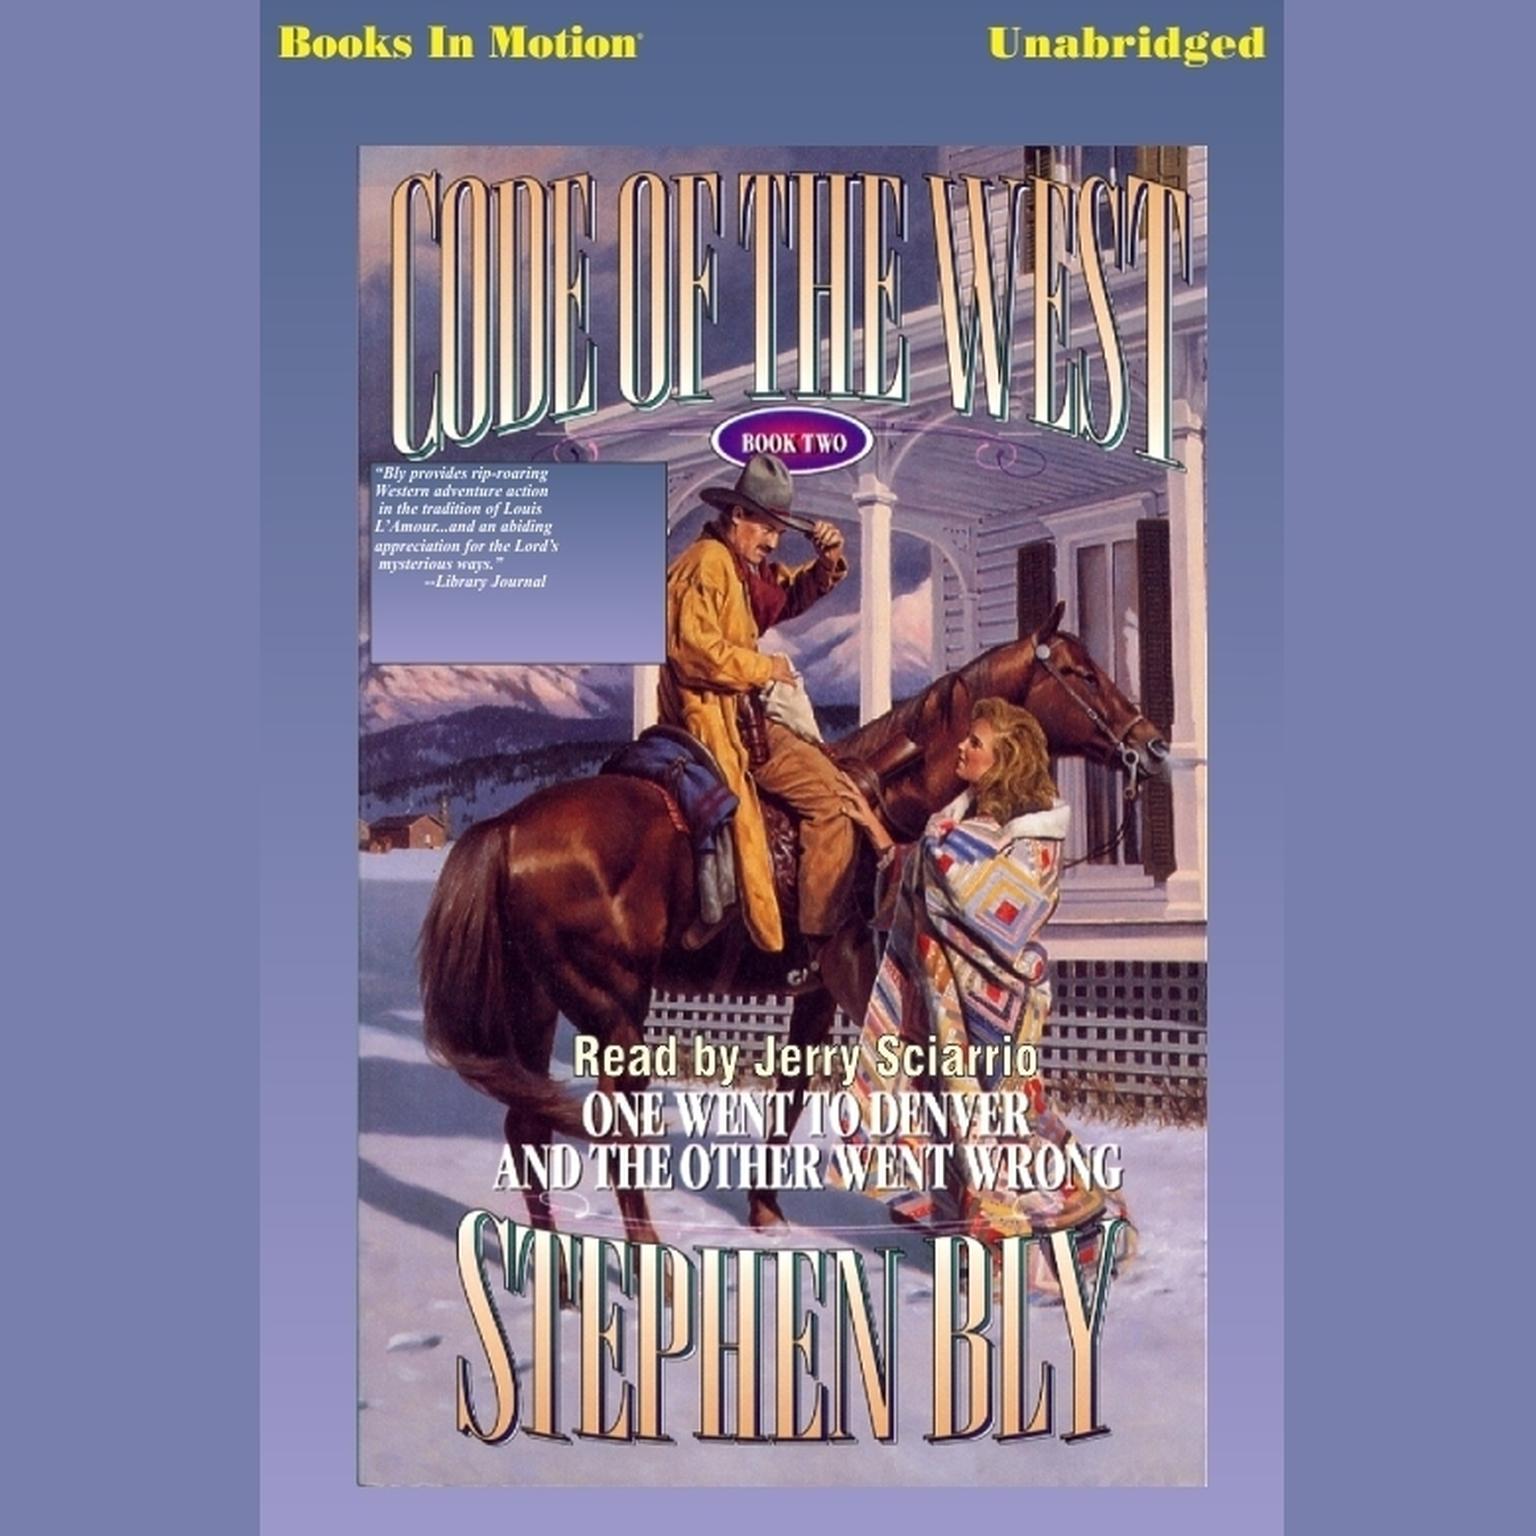 One Went to Denver and the Other Went Wrong Audiobook, by Stephen Bly